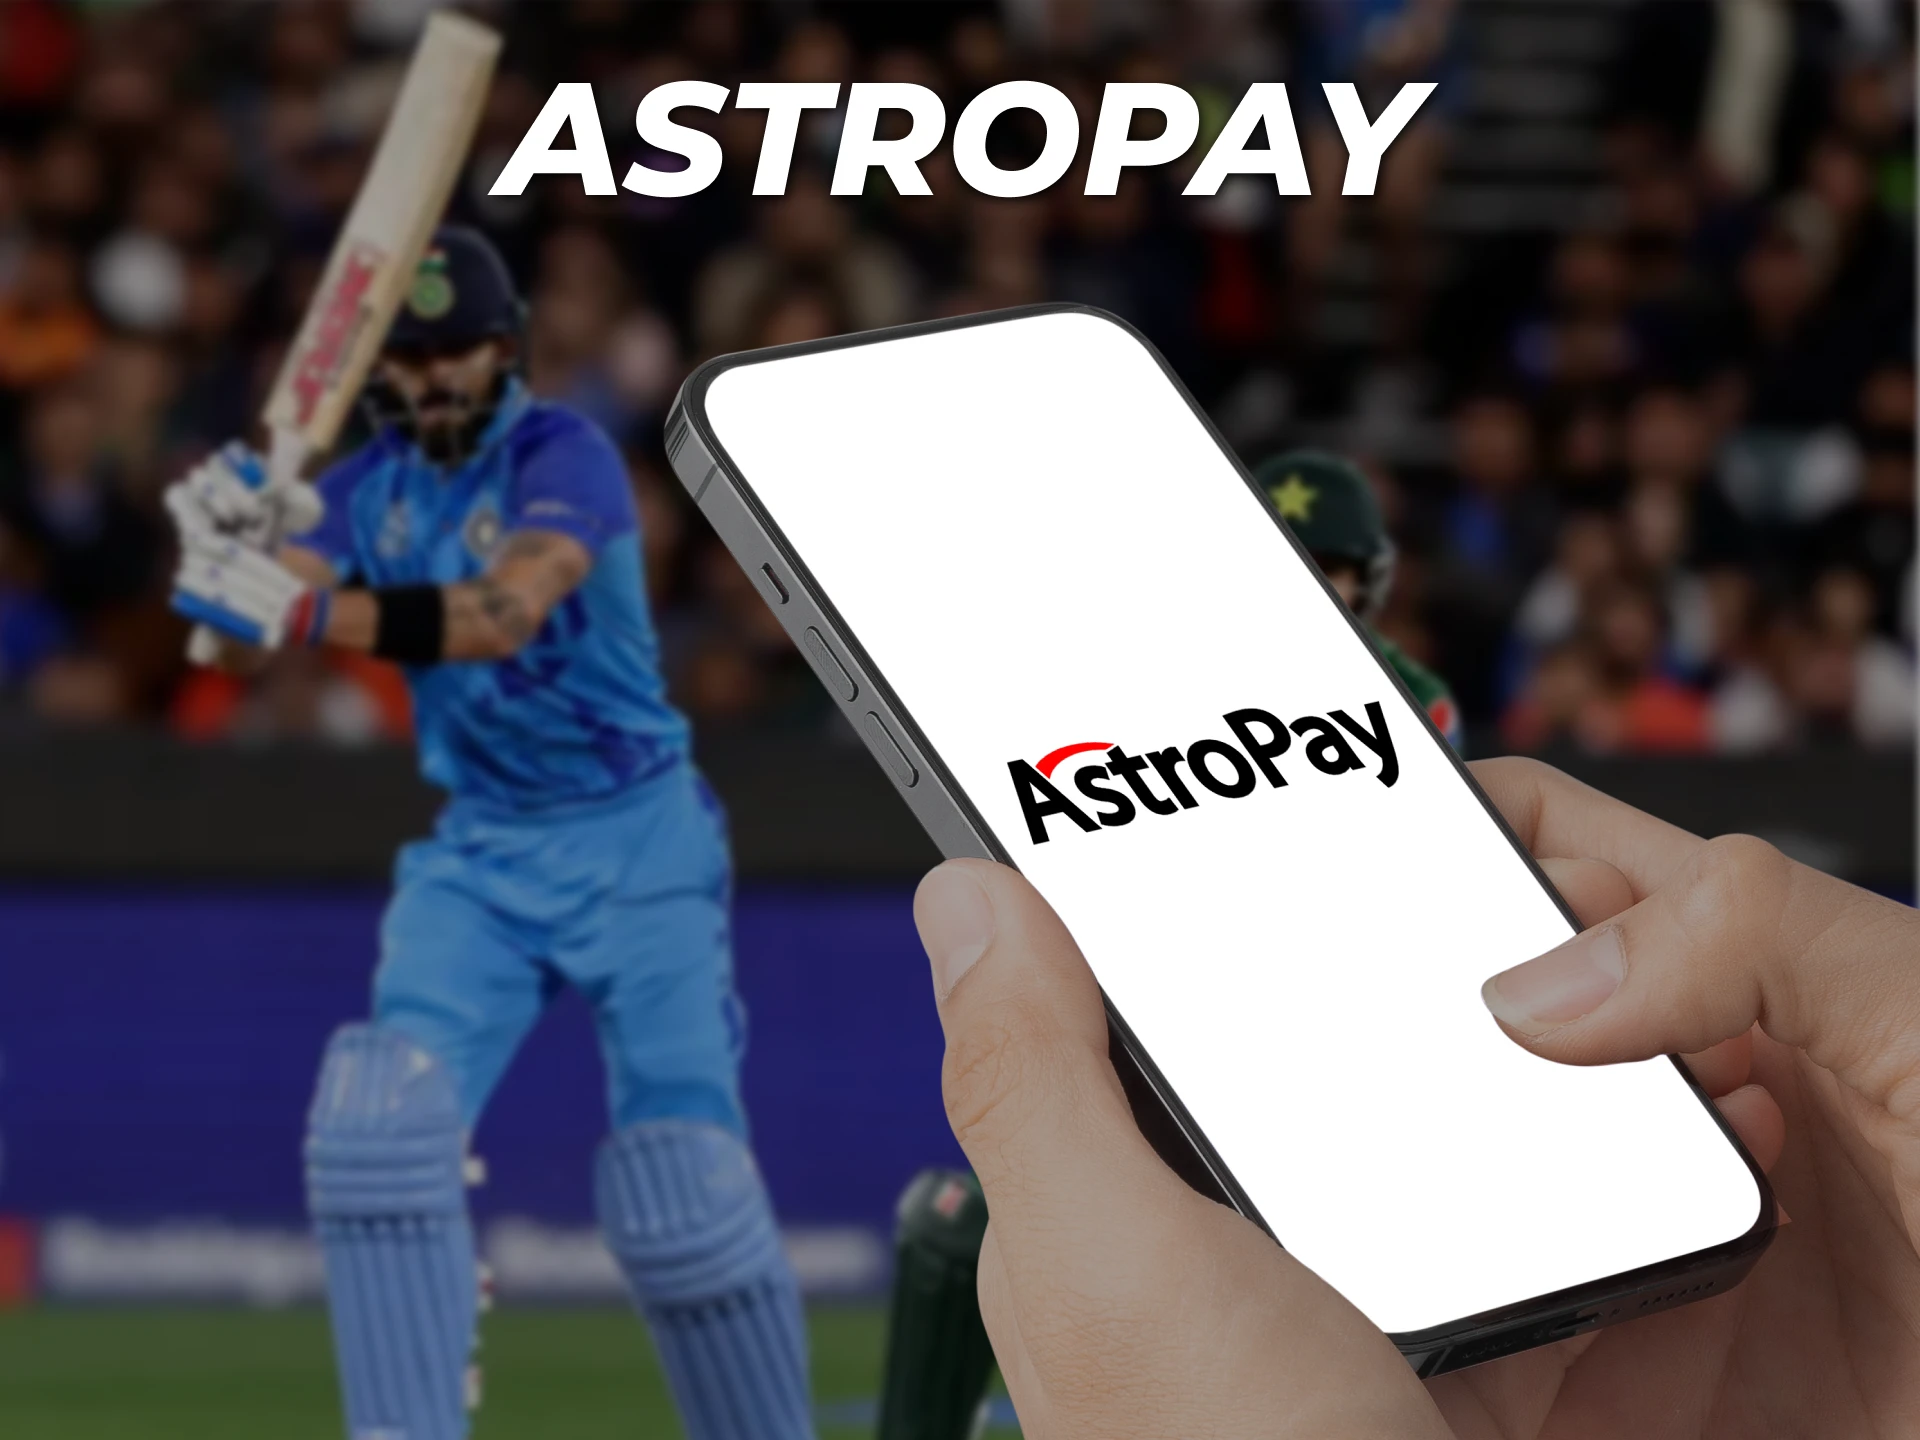 Use AstroPay for online transactions.